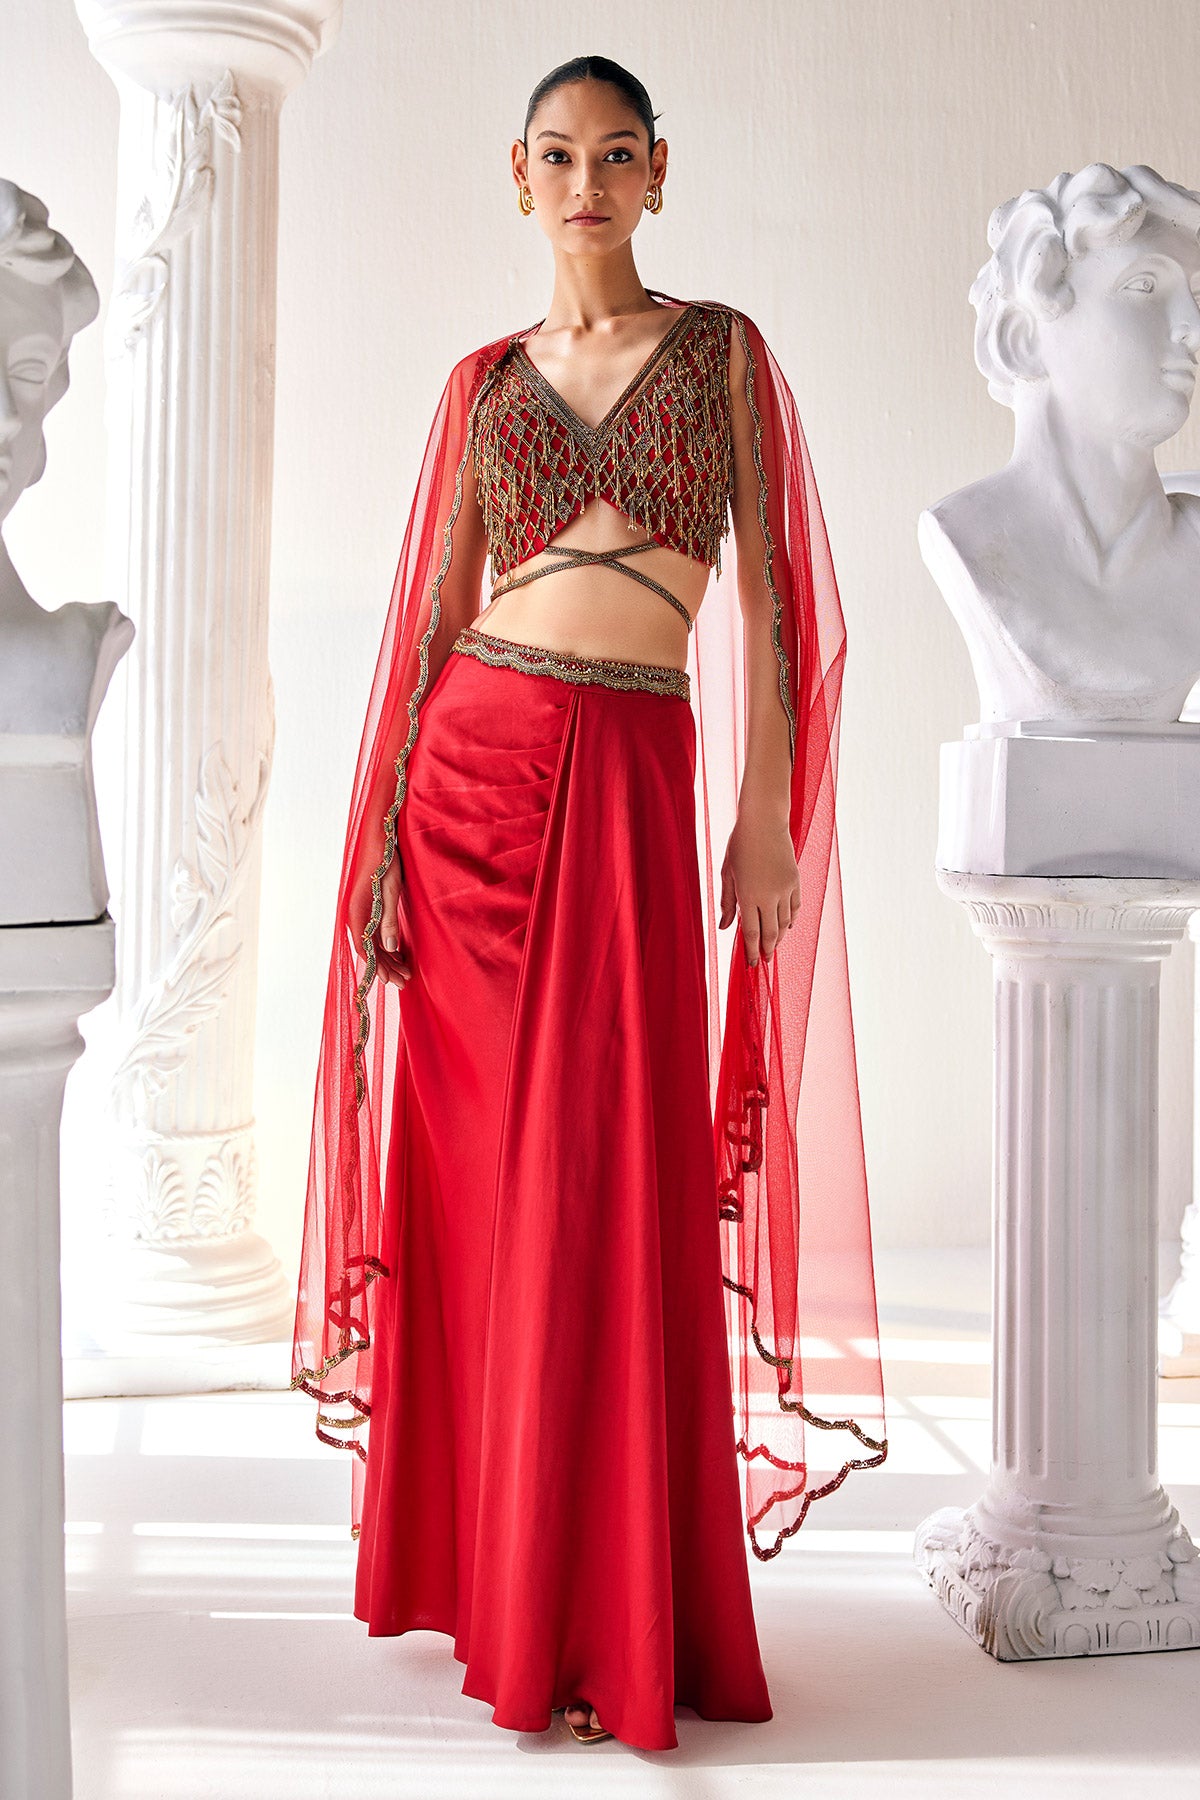 Elegant Red Ensemble Features A Royal Satin Skirt, Fully Embroidered Blouse, Belt And A Cape In A Soft Net.